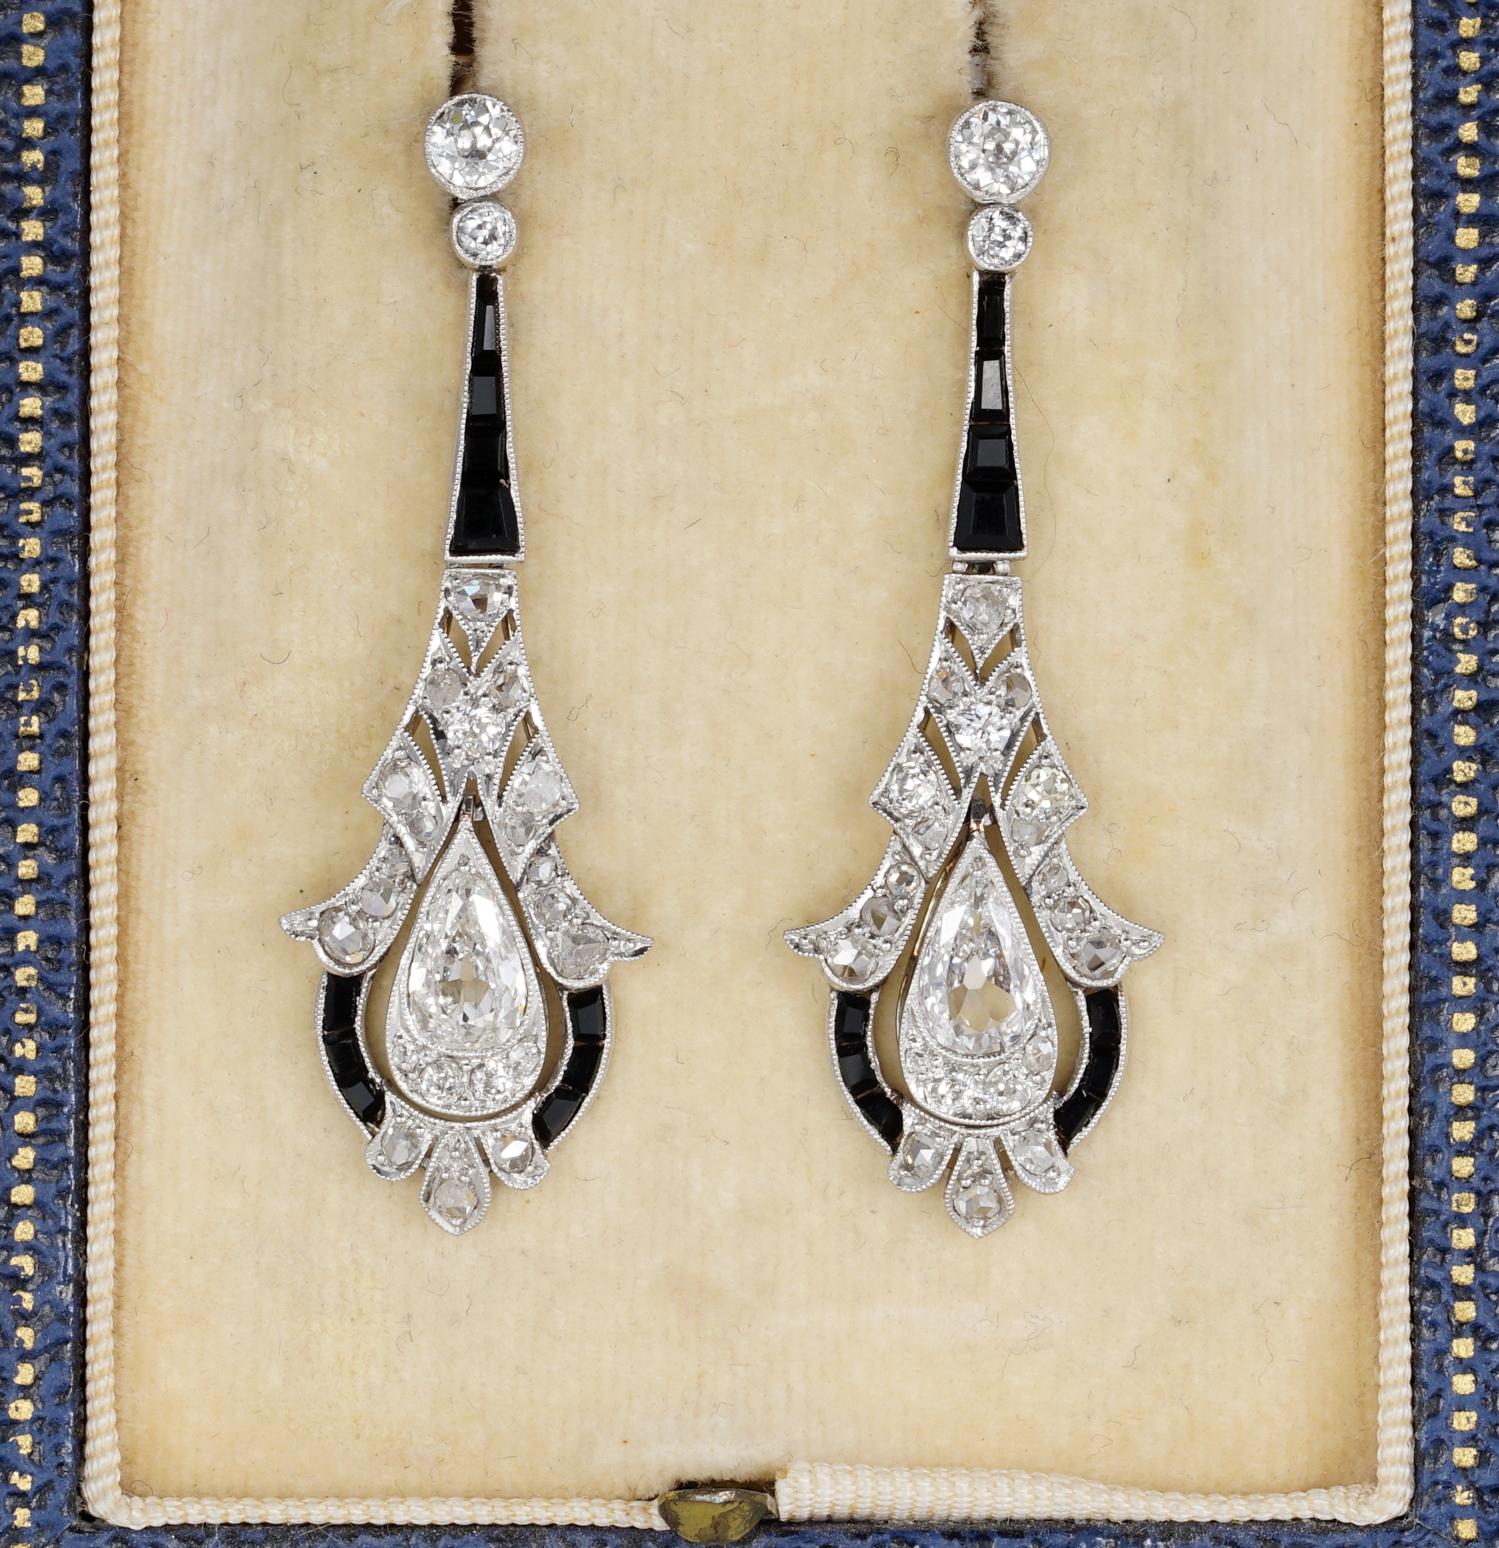 These outstanding pair of Belle Epoque earrings are far the best one can get in the own jewelry box. Finest ever made, outstanding in design with the best ever selection of Diamonds in match with custom cut Black Onyx. A distinctive pair true